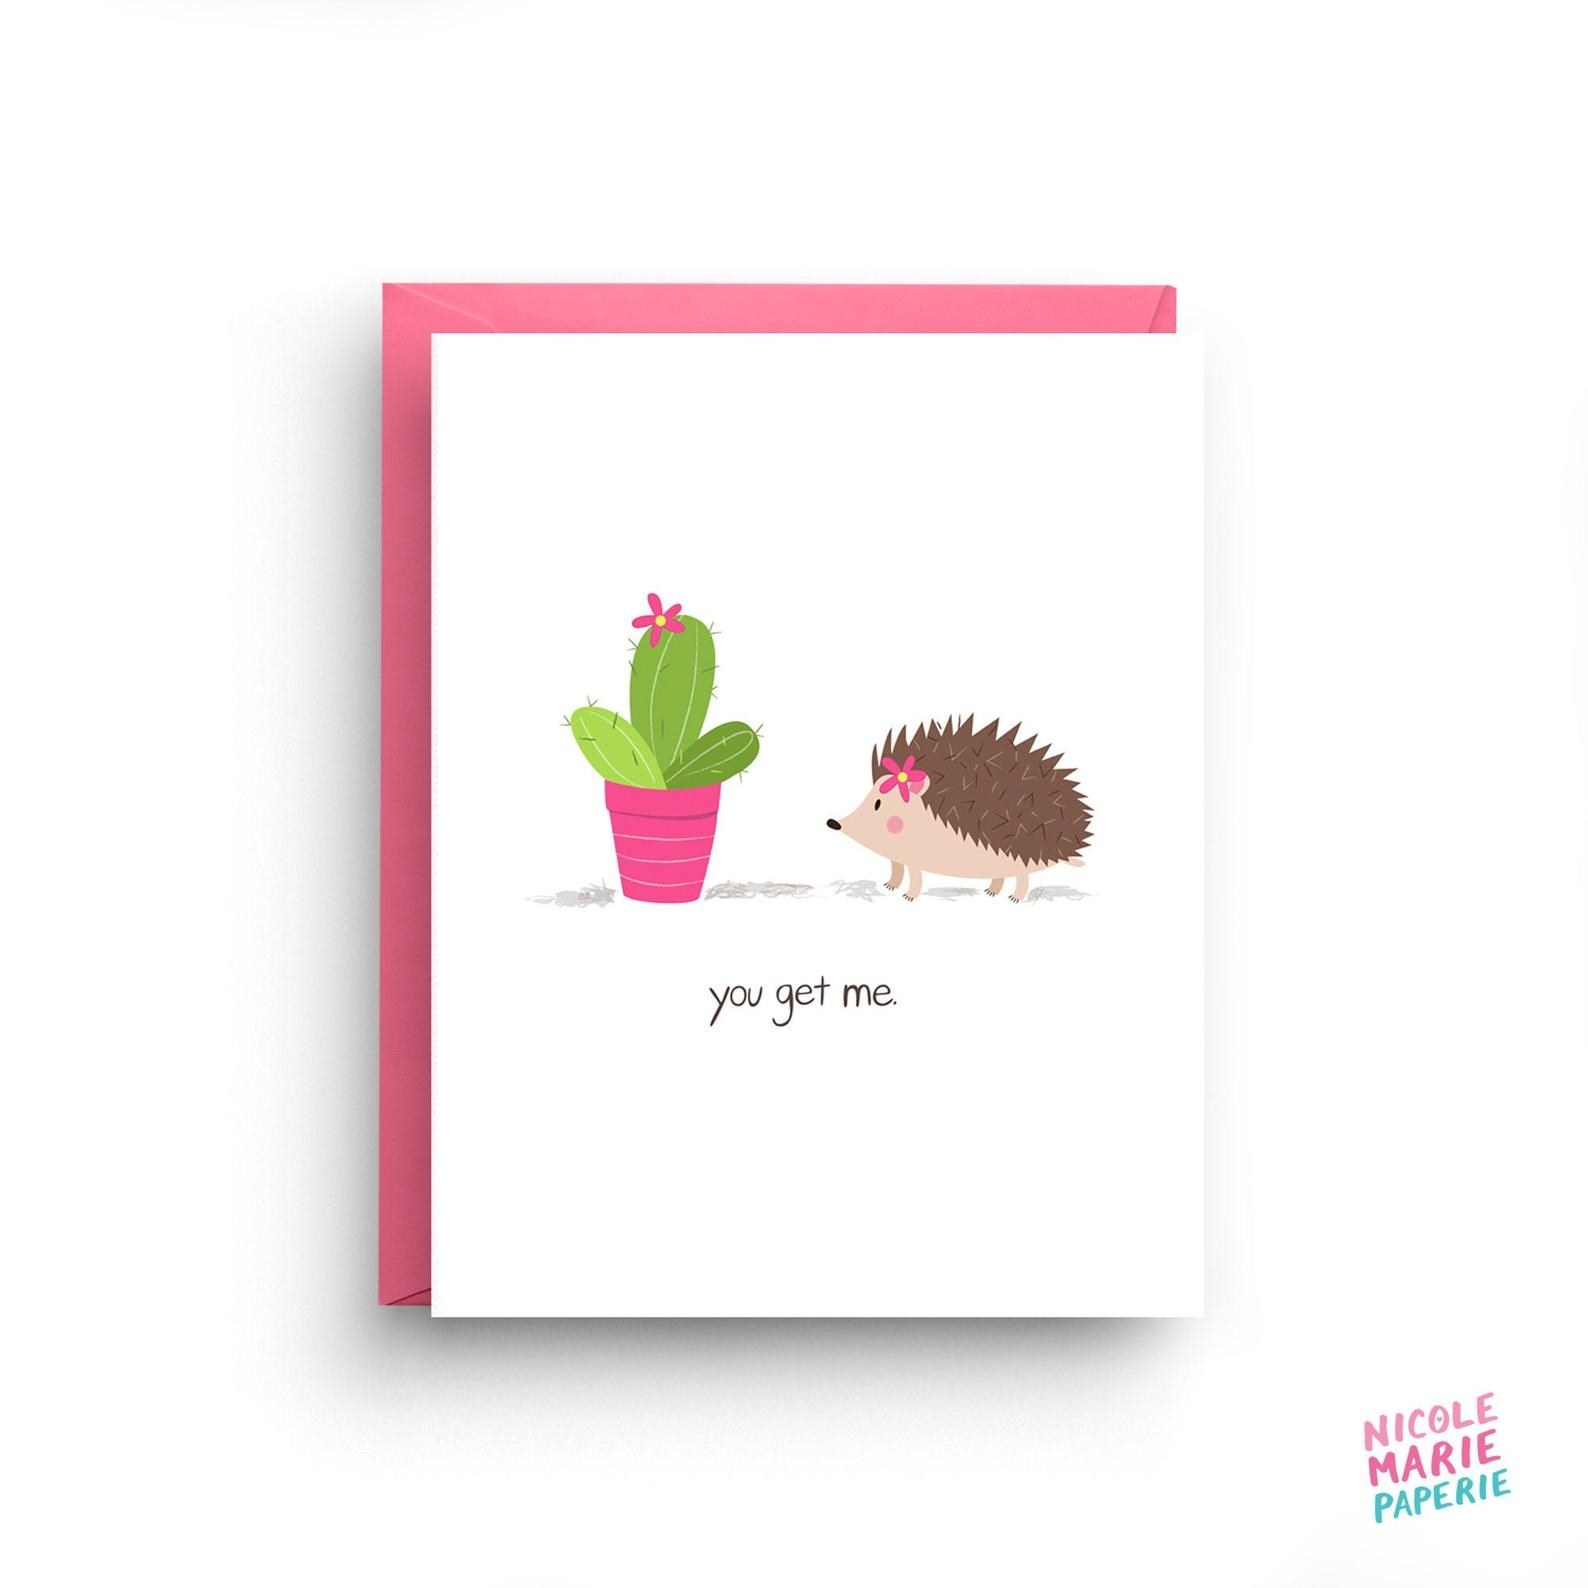 the card, which says &quot;you get me,&quot; with an illustration of a cactus and a hedgehog, both of which have prickly thorns